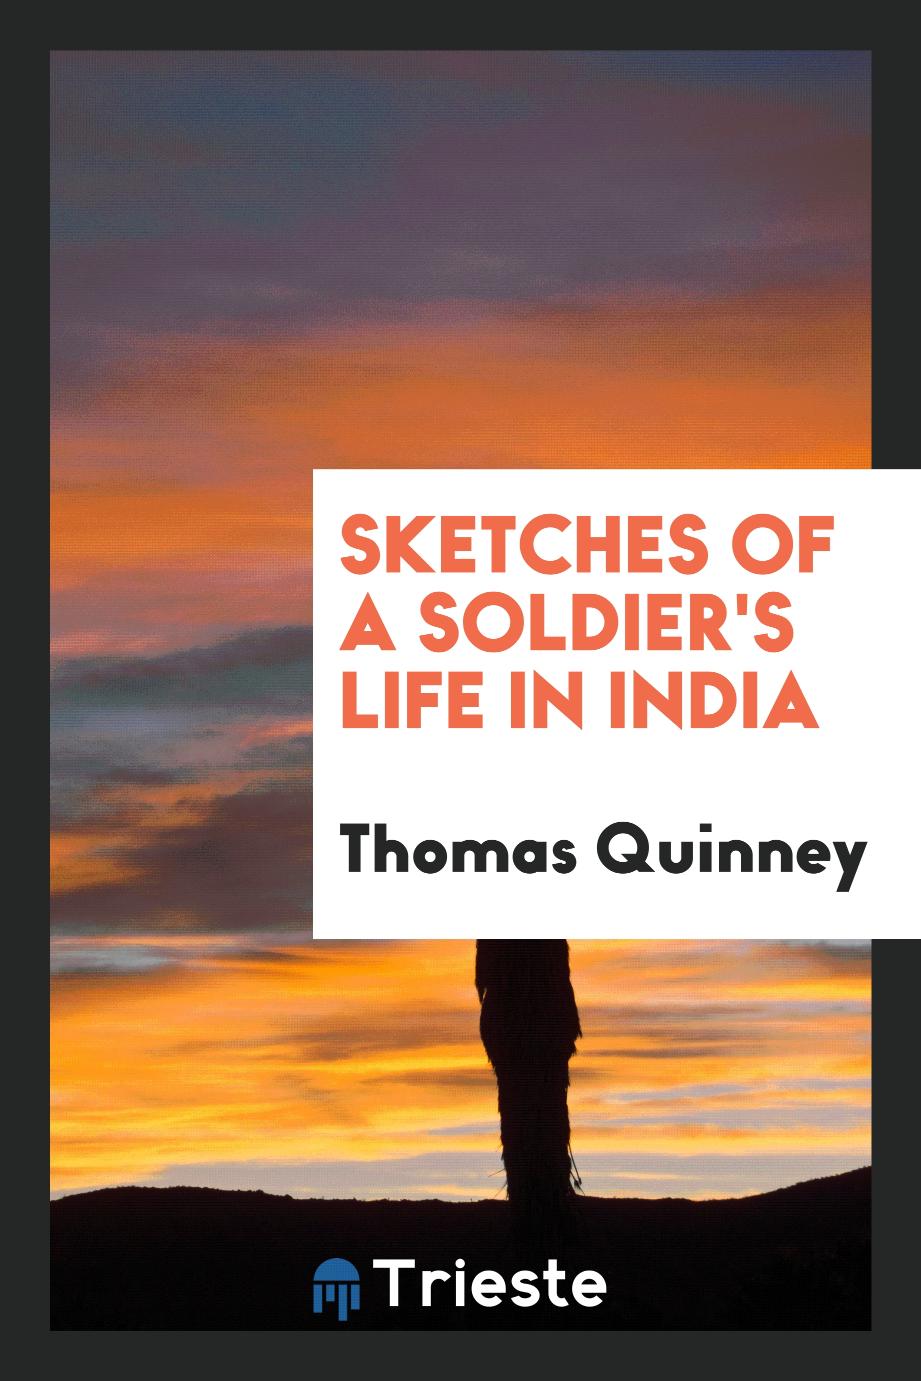 Sketches of a Soldier's Life in India